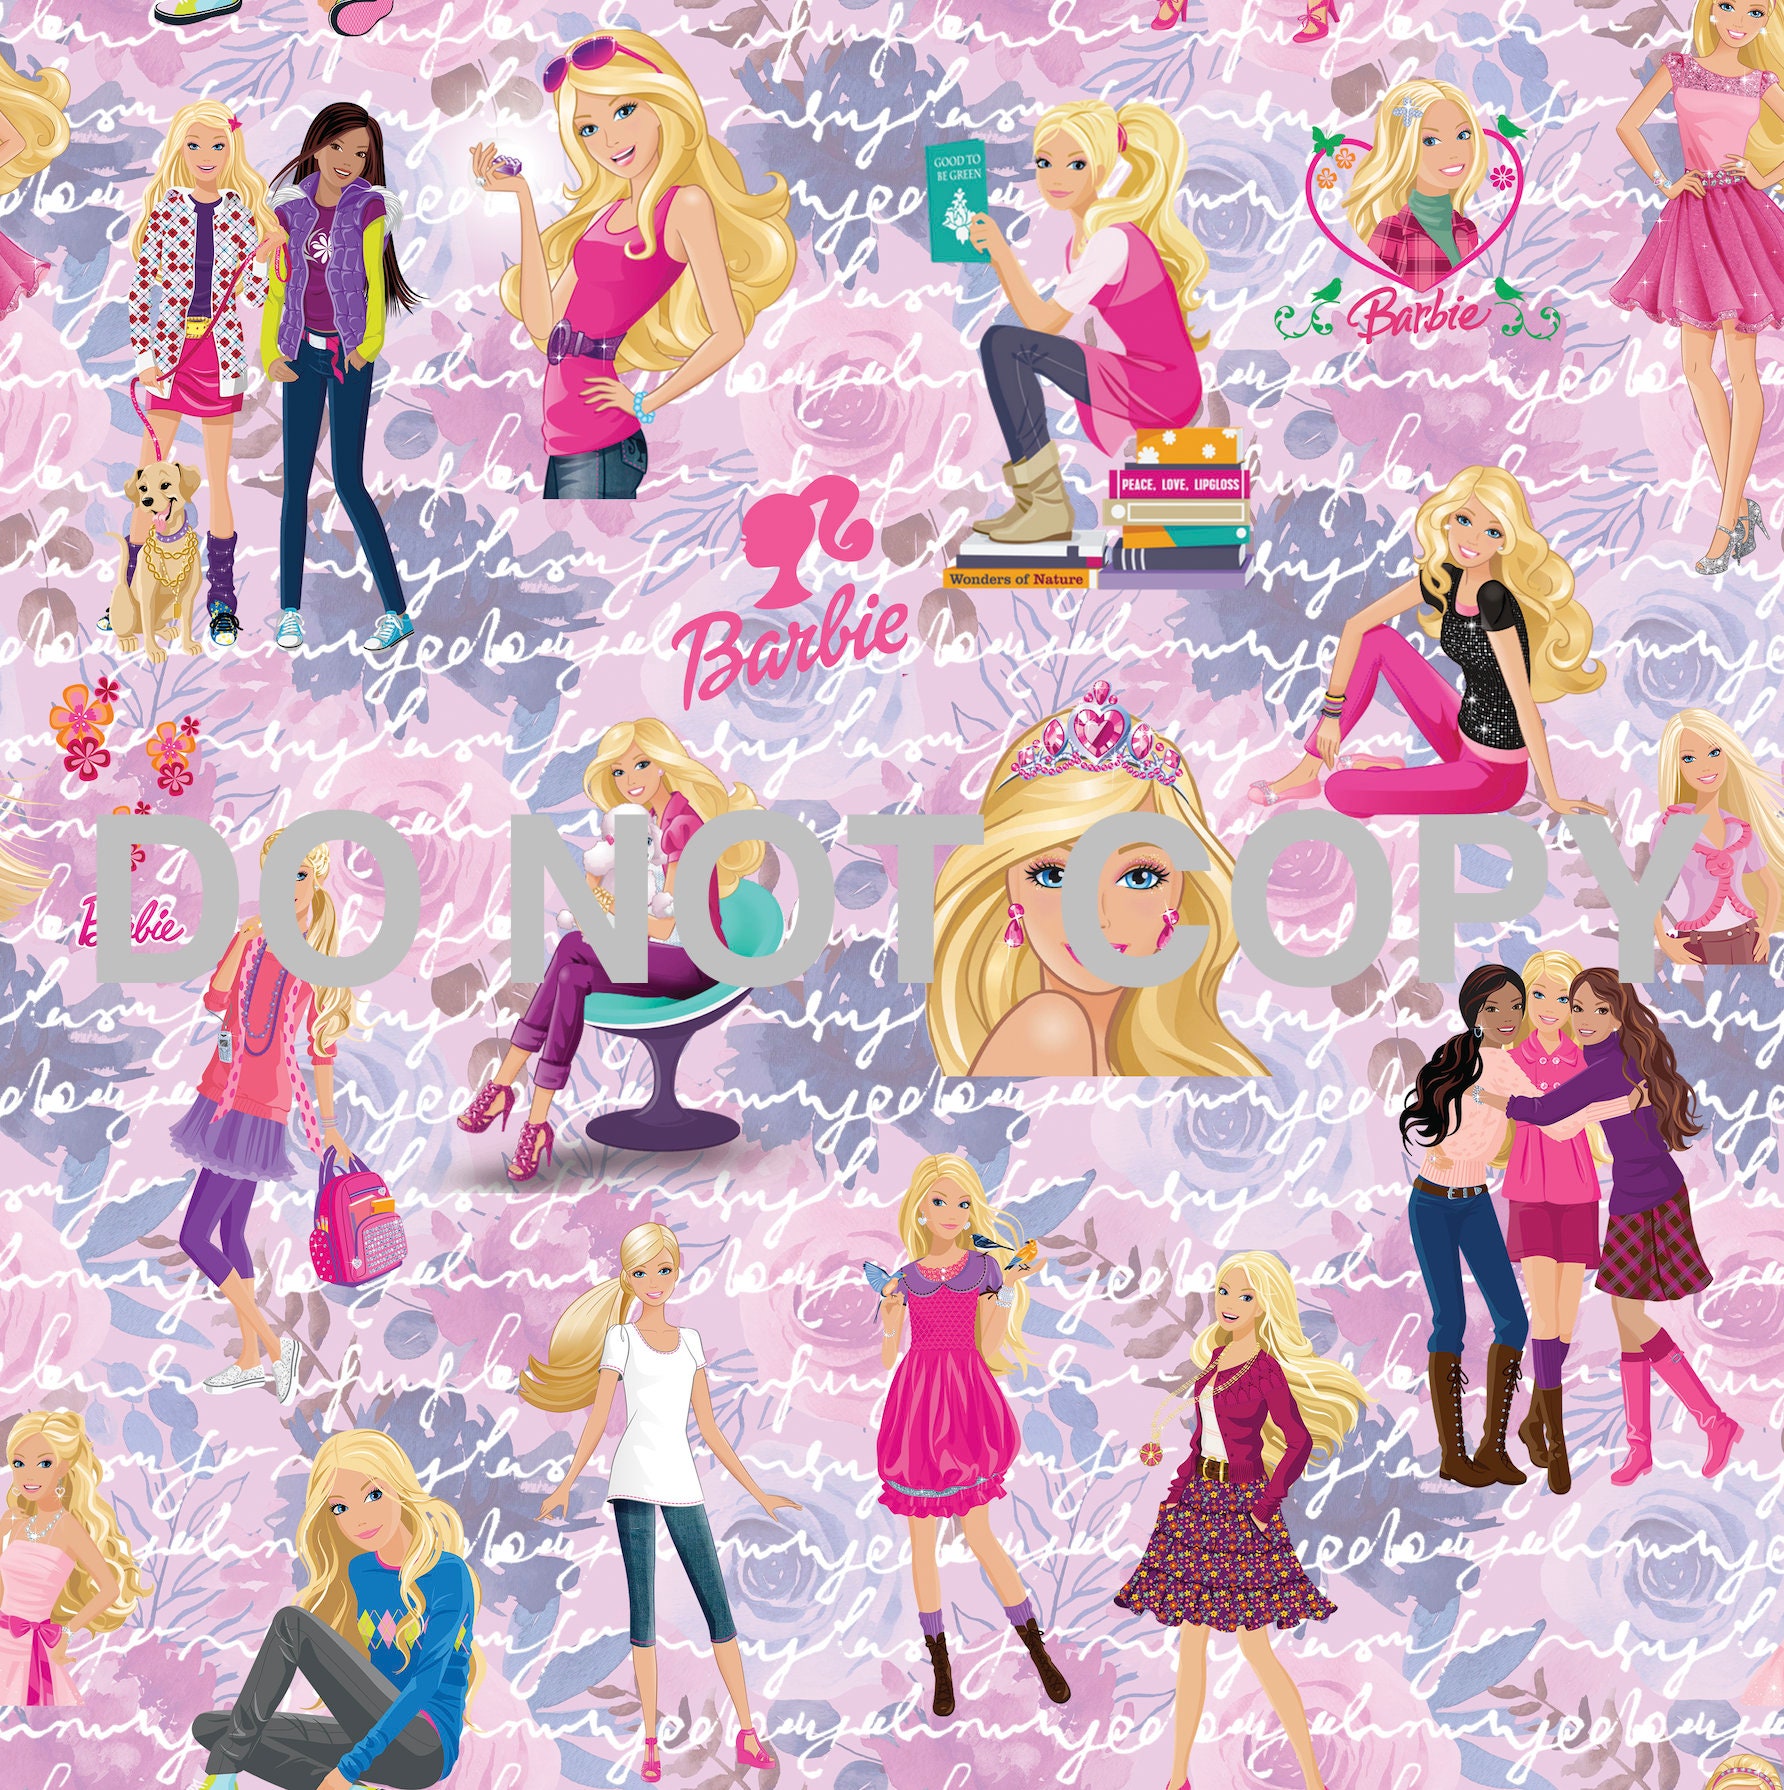 momoka's apron pink lol doll earring stickers (24 pairs) for birthday gift  party favors etc 